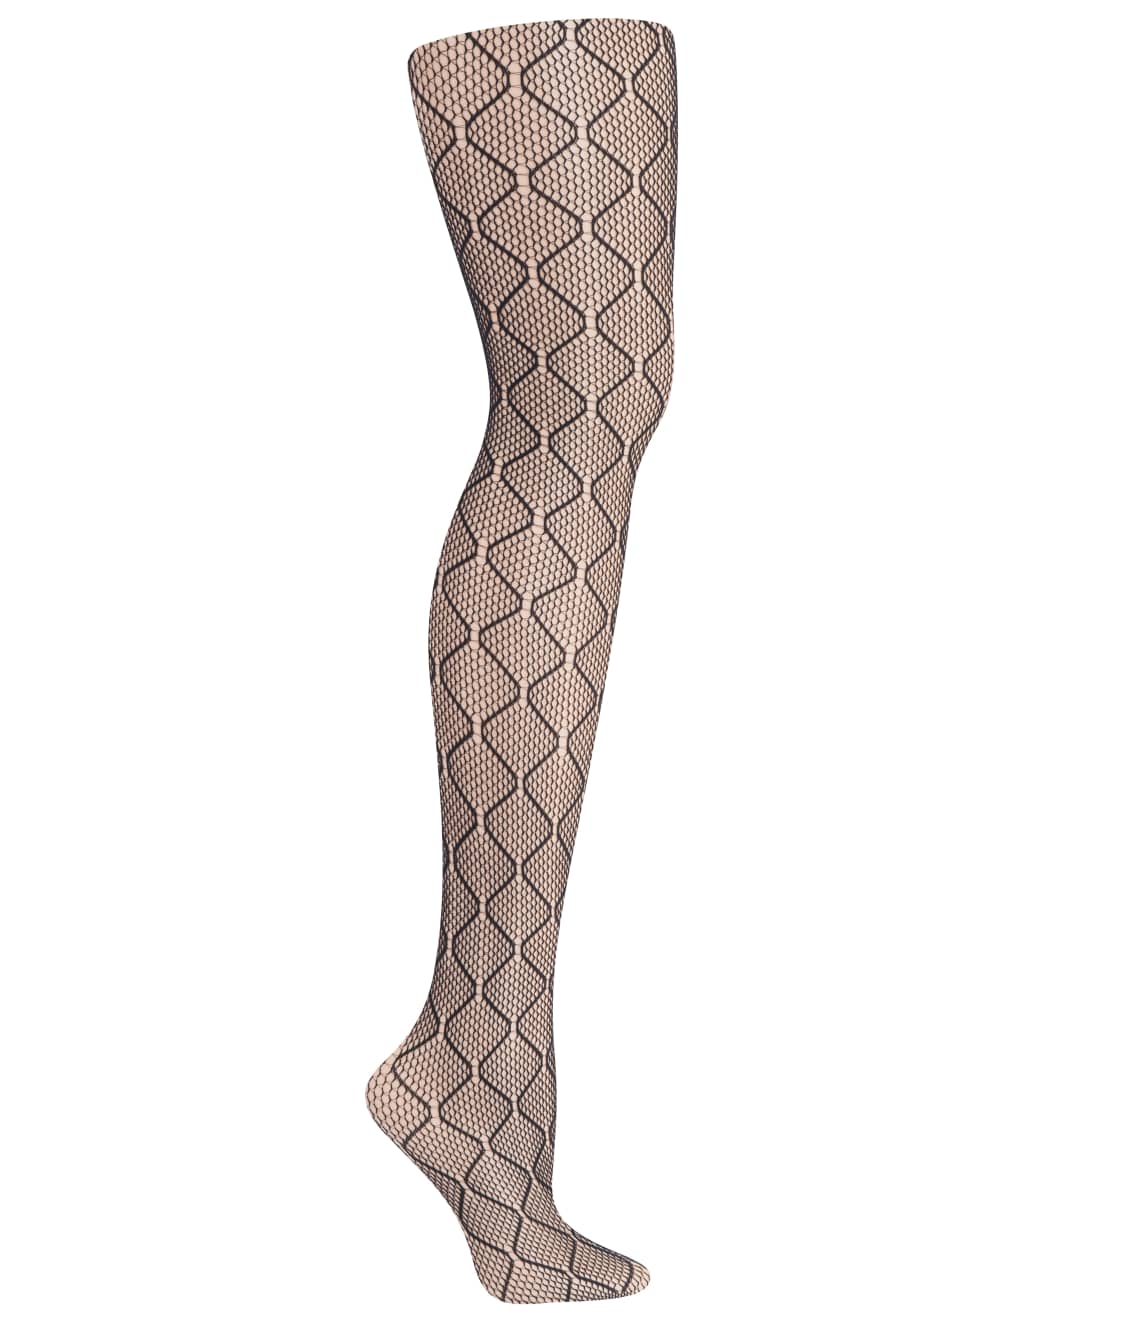 Hanes Plus Size Curves Diamond Net Tights & Reviews | Bare Necessities ...